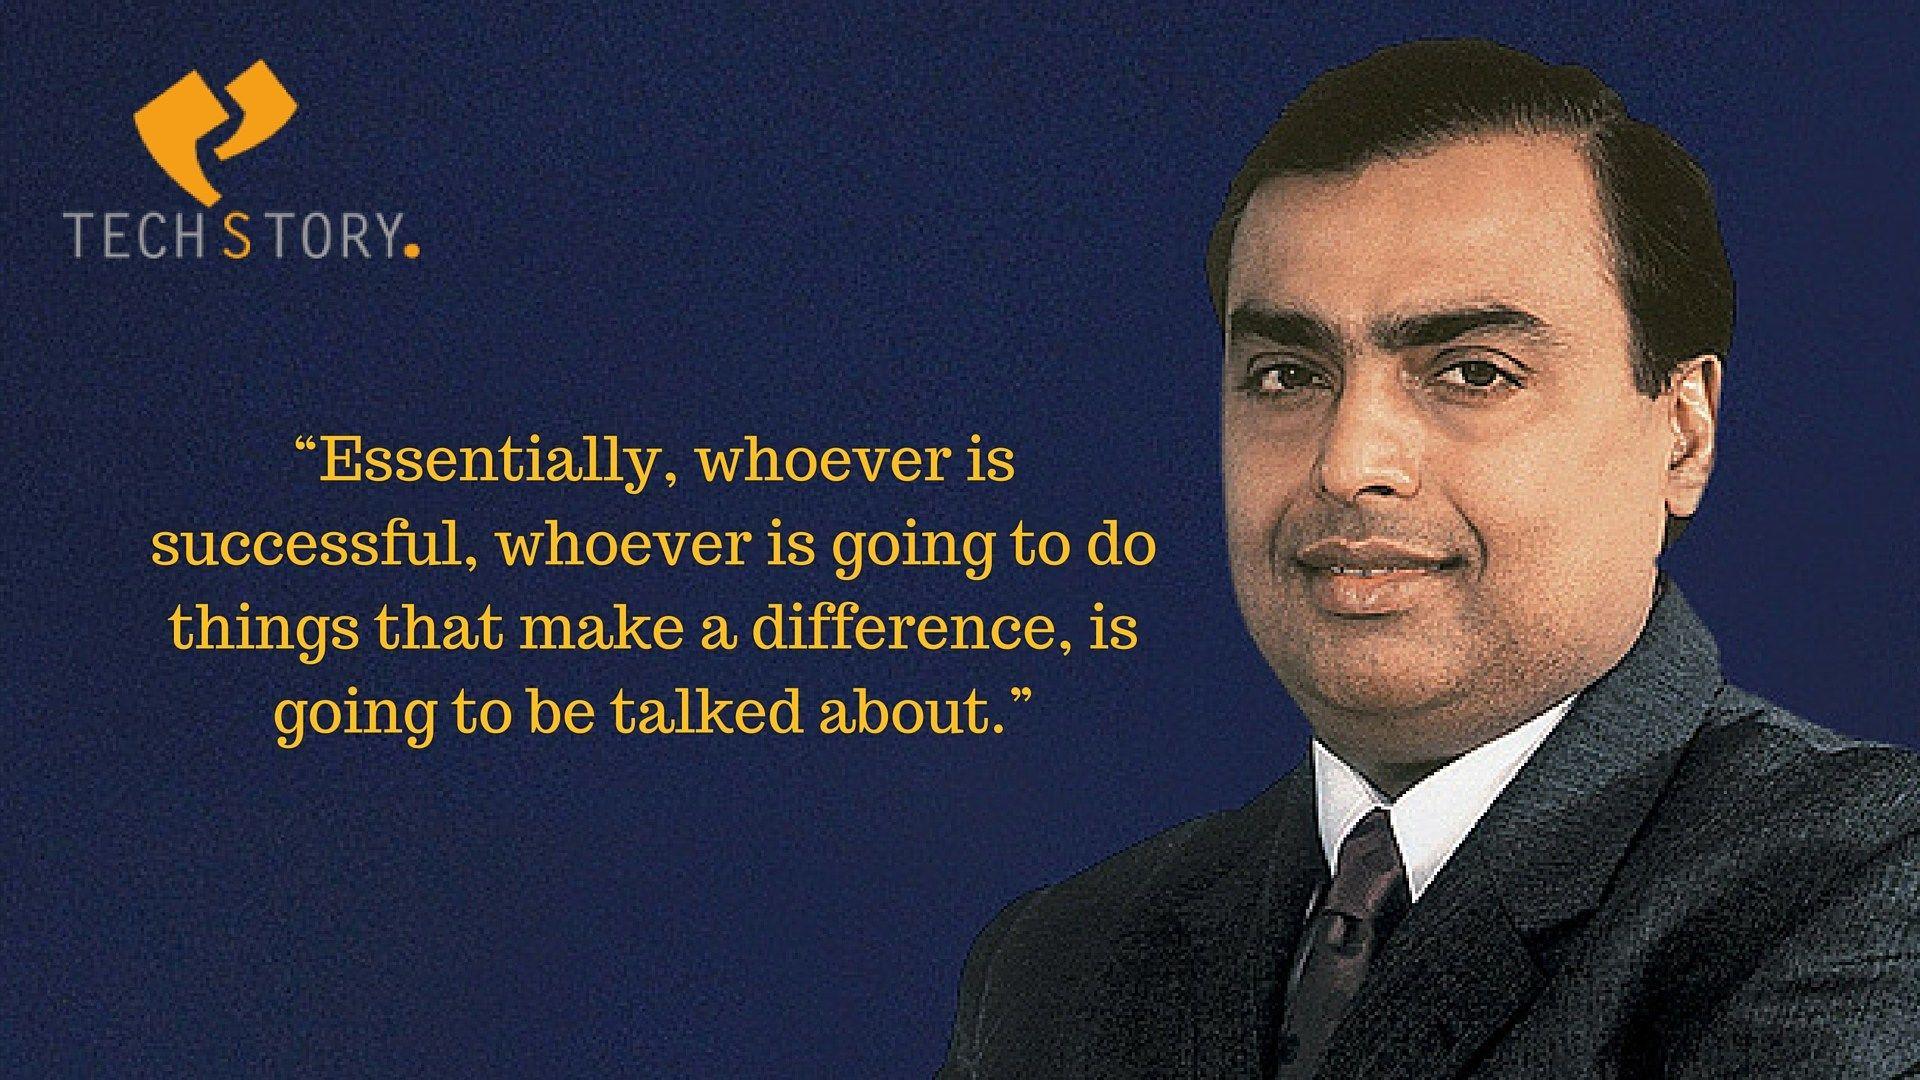 5 of Mukesh Ambani's surprising habits – including asking for his mother's  blessing each day | South China Morning Post